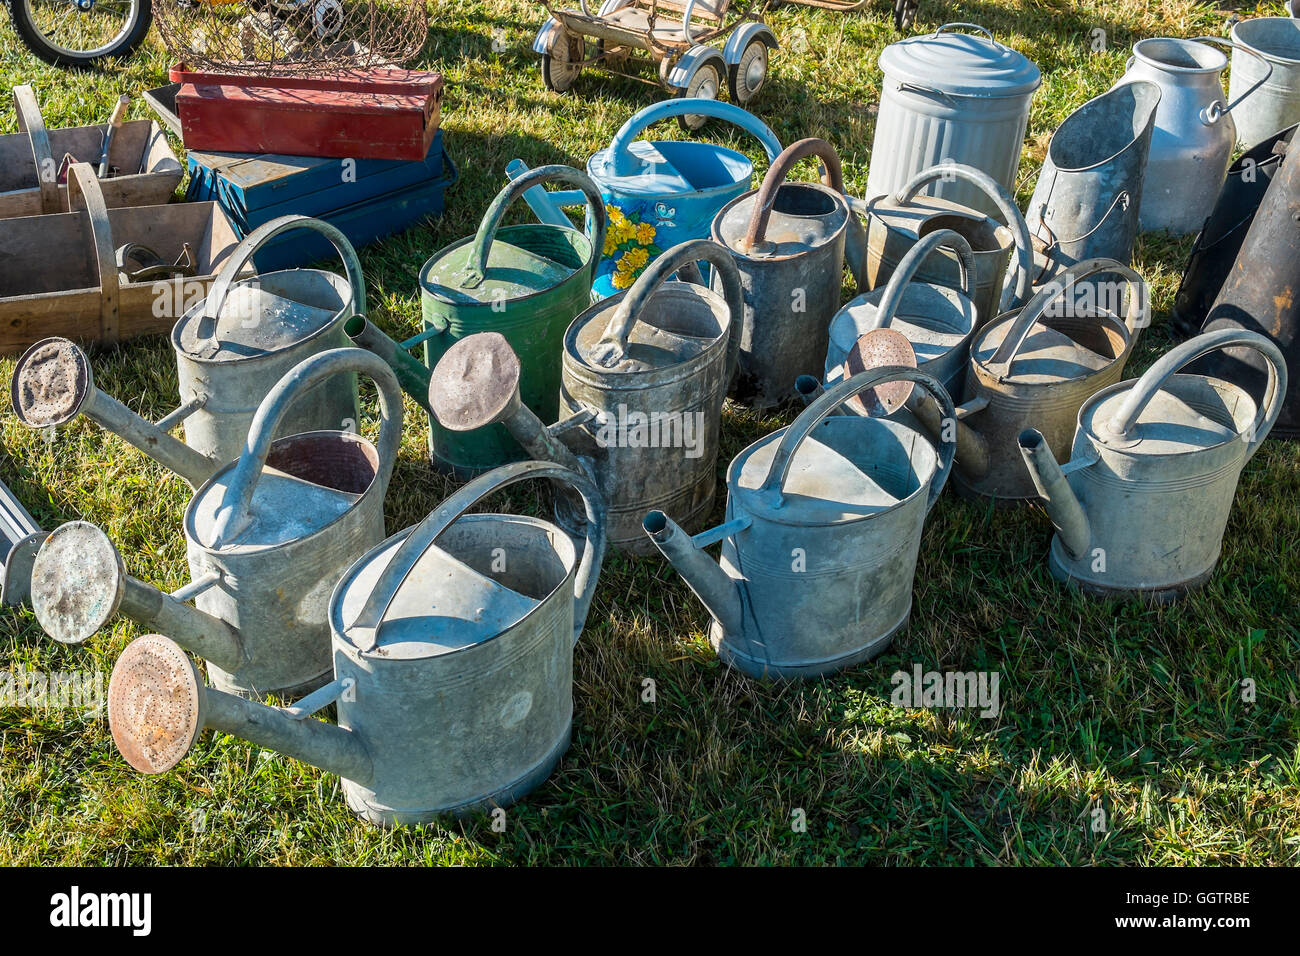 Display of old watering cans and utensils at open-air event - sud-Touraine, France. Stock Photo